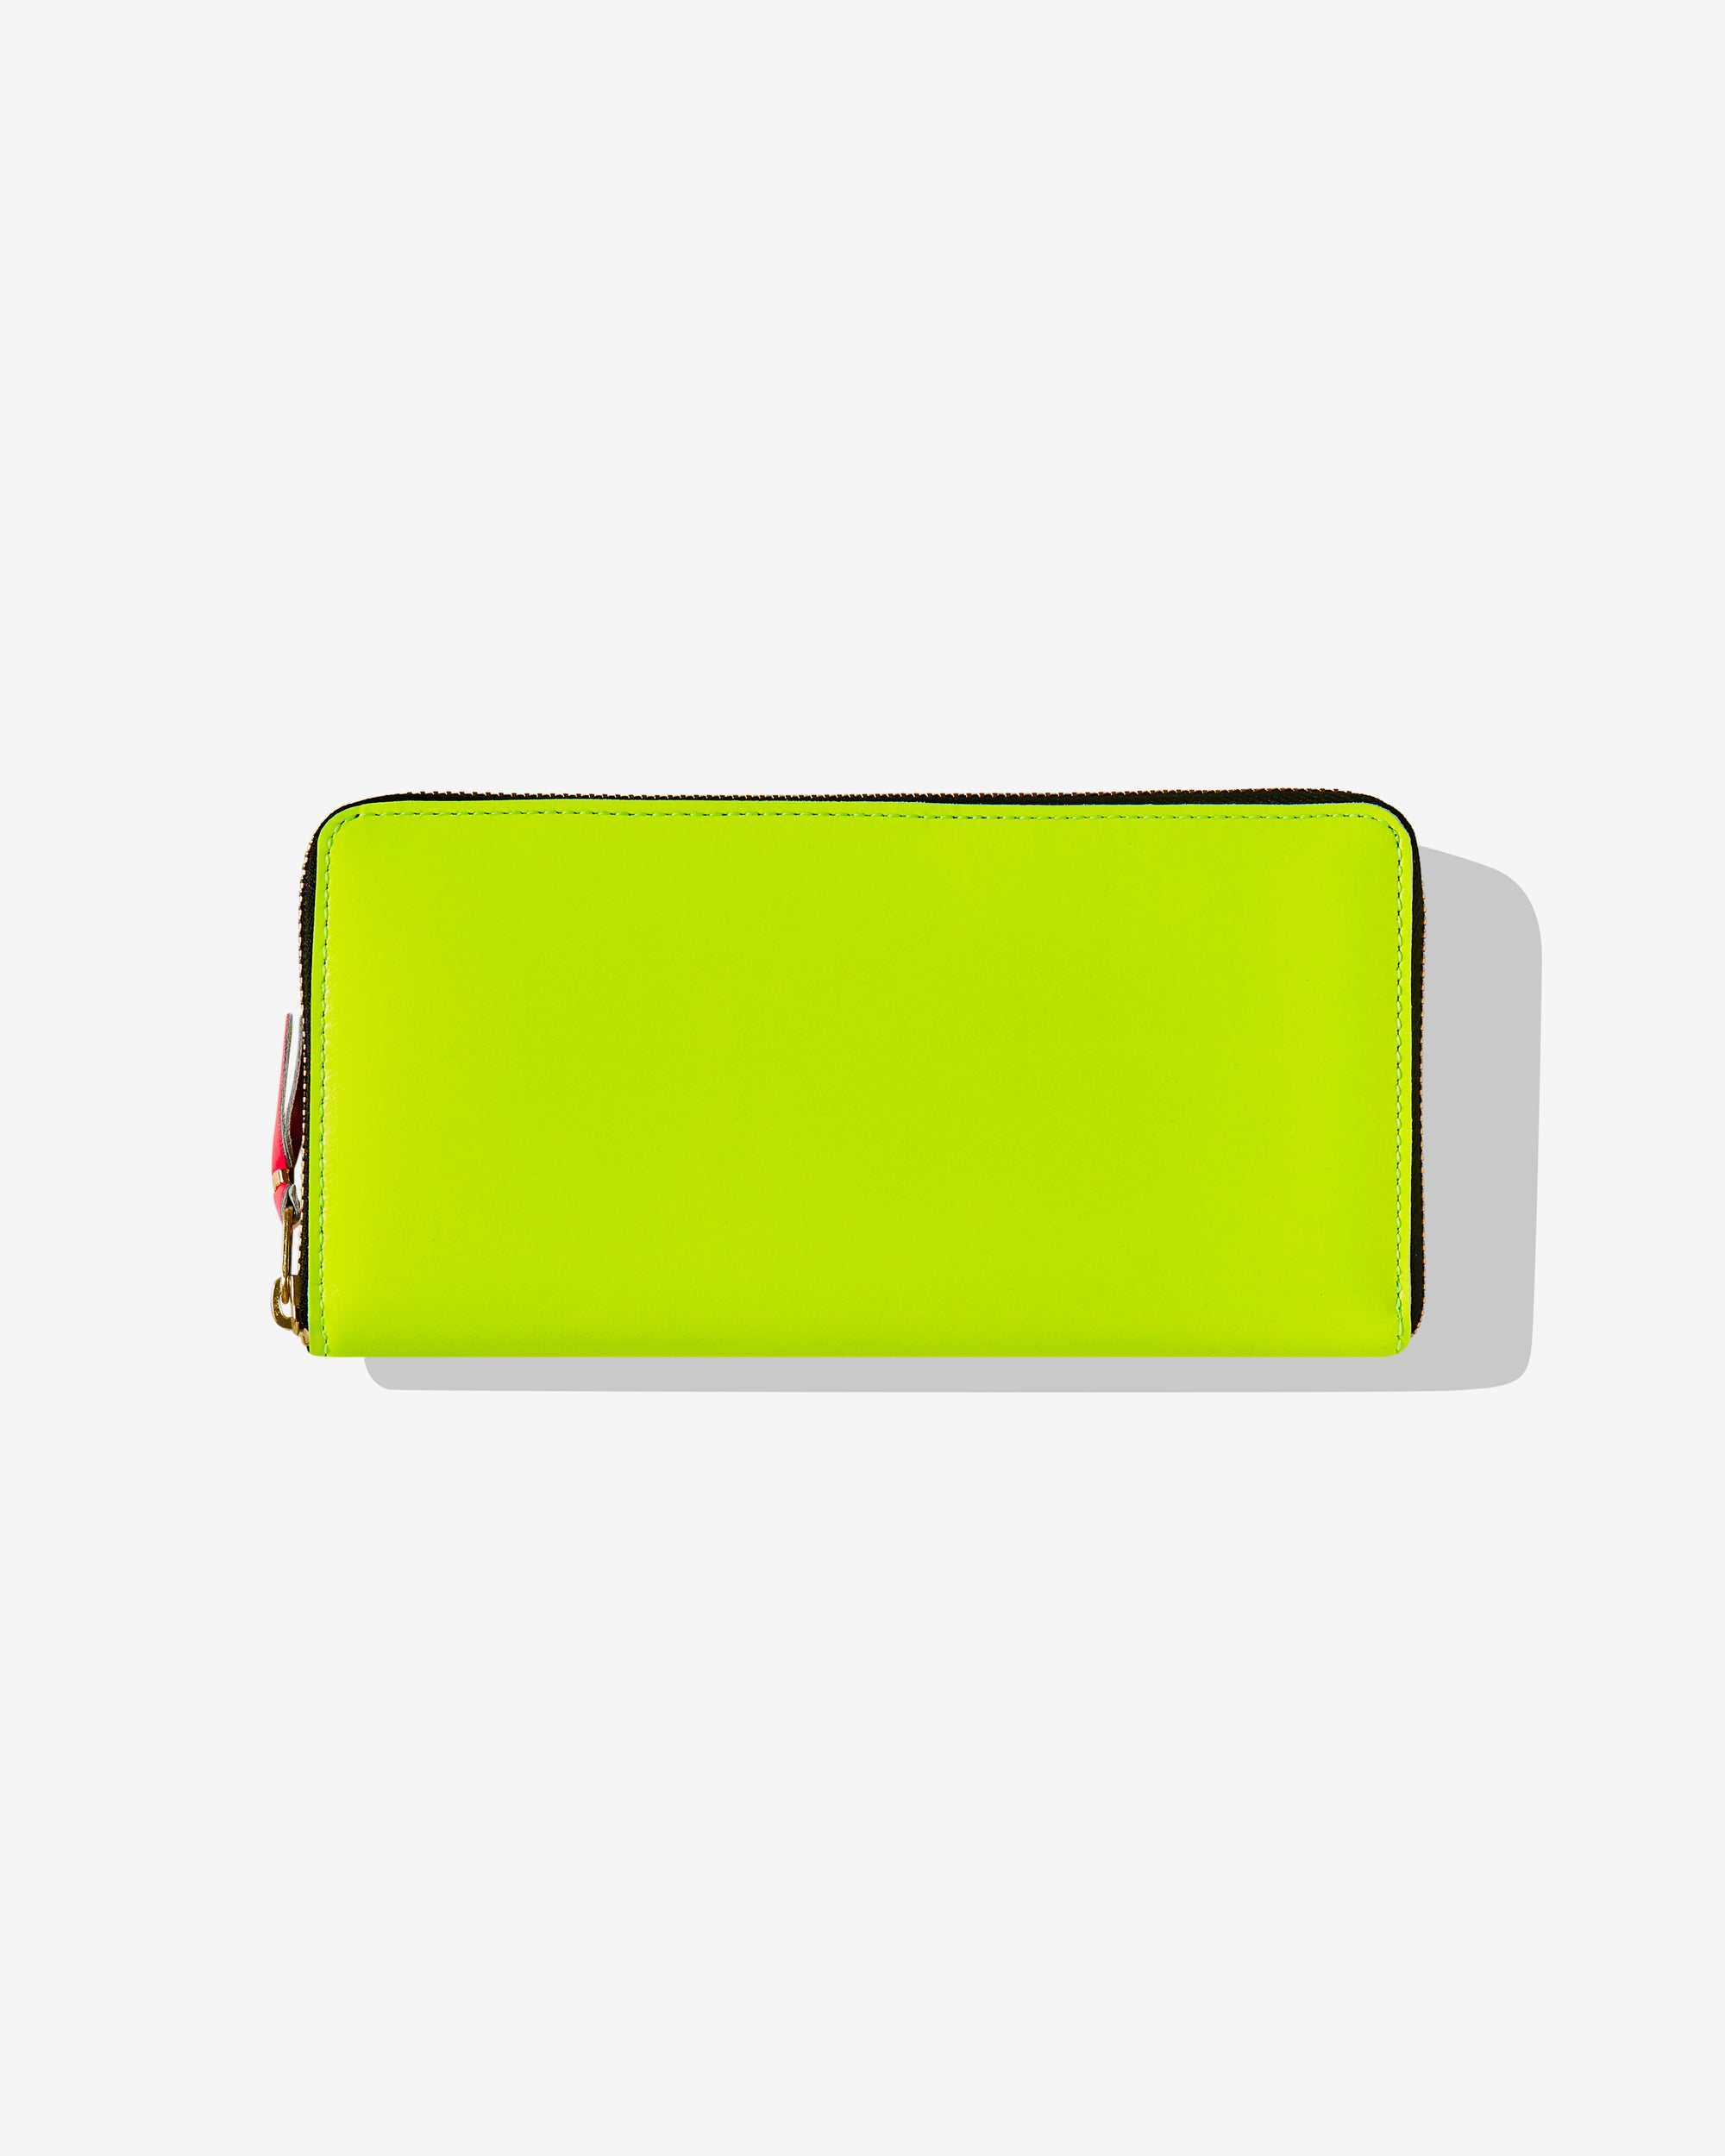 CDG Wallet - Super Fluo Zip Around Wallet - (Yellow SA0110SF) view 1